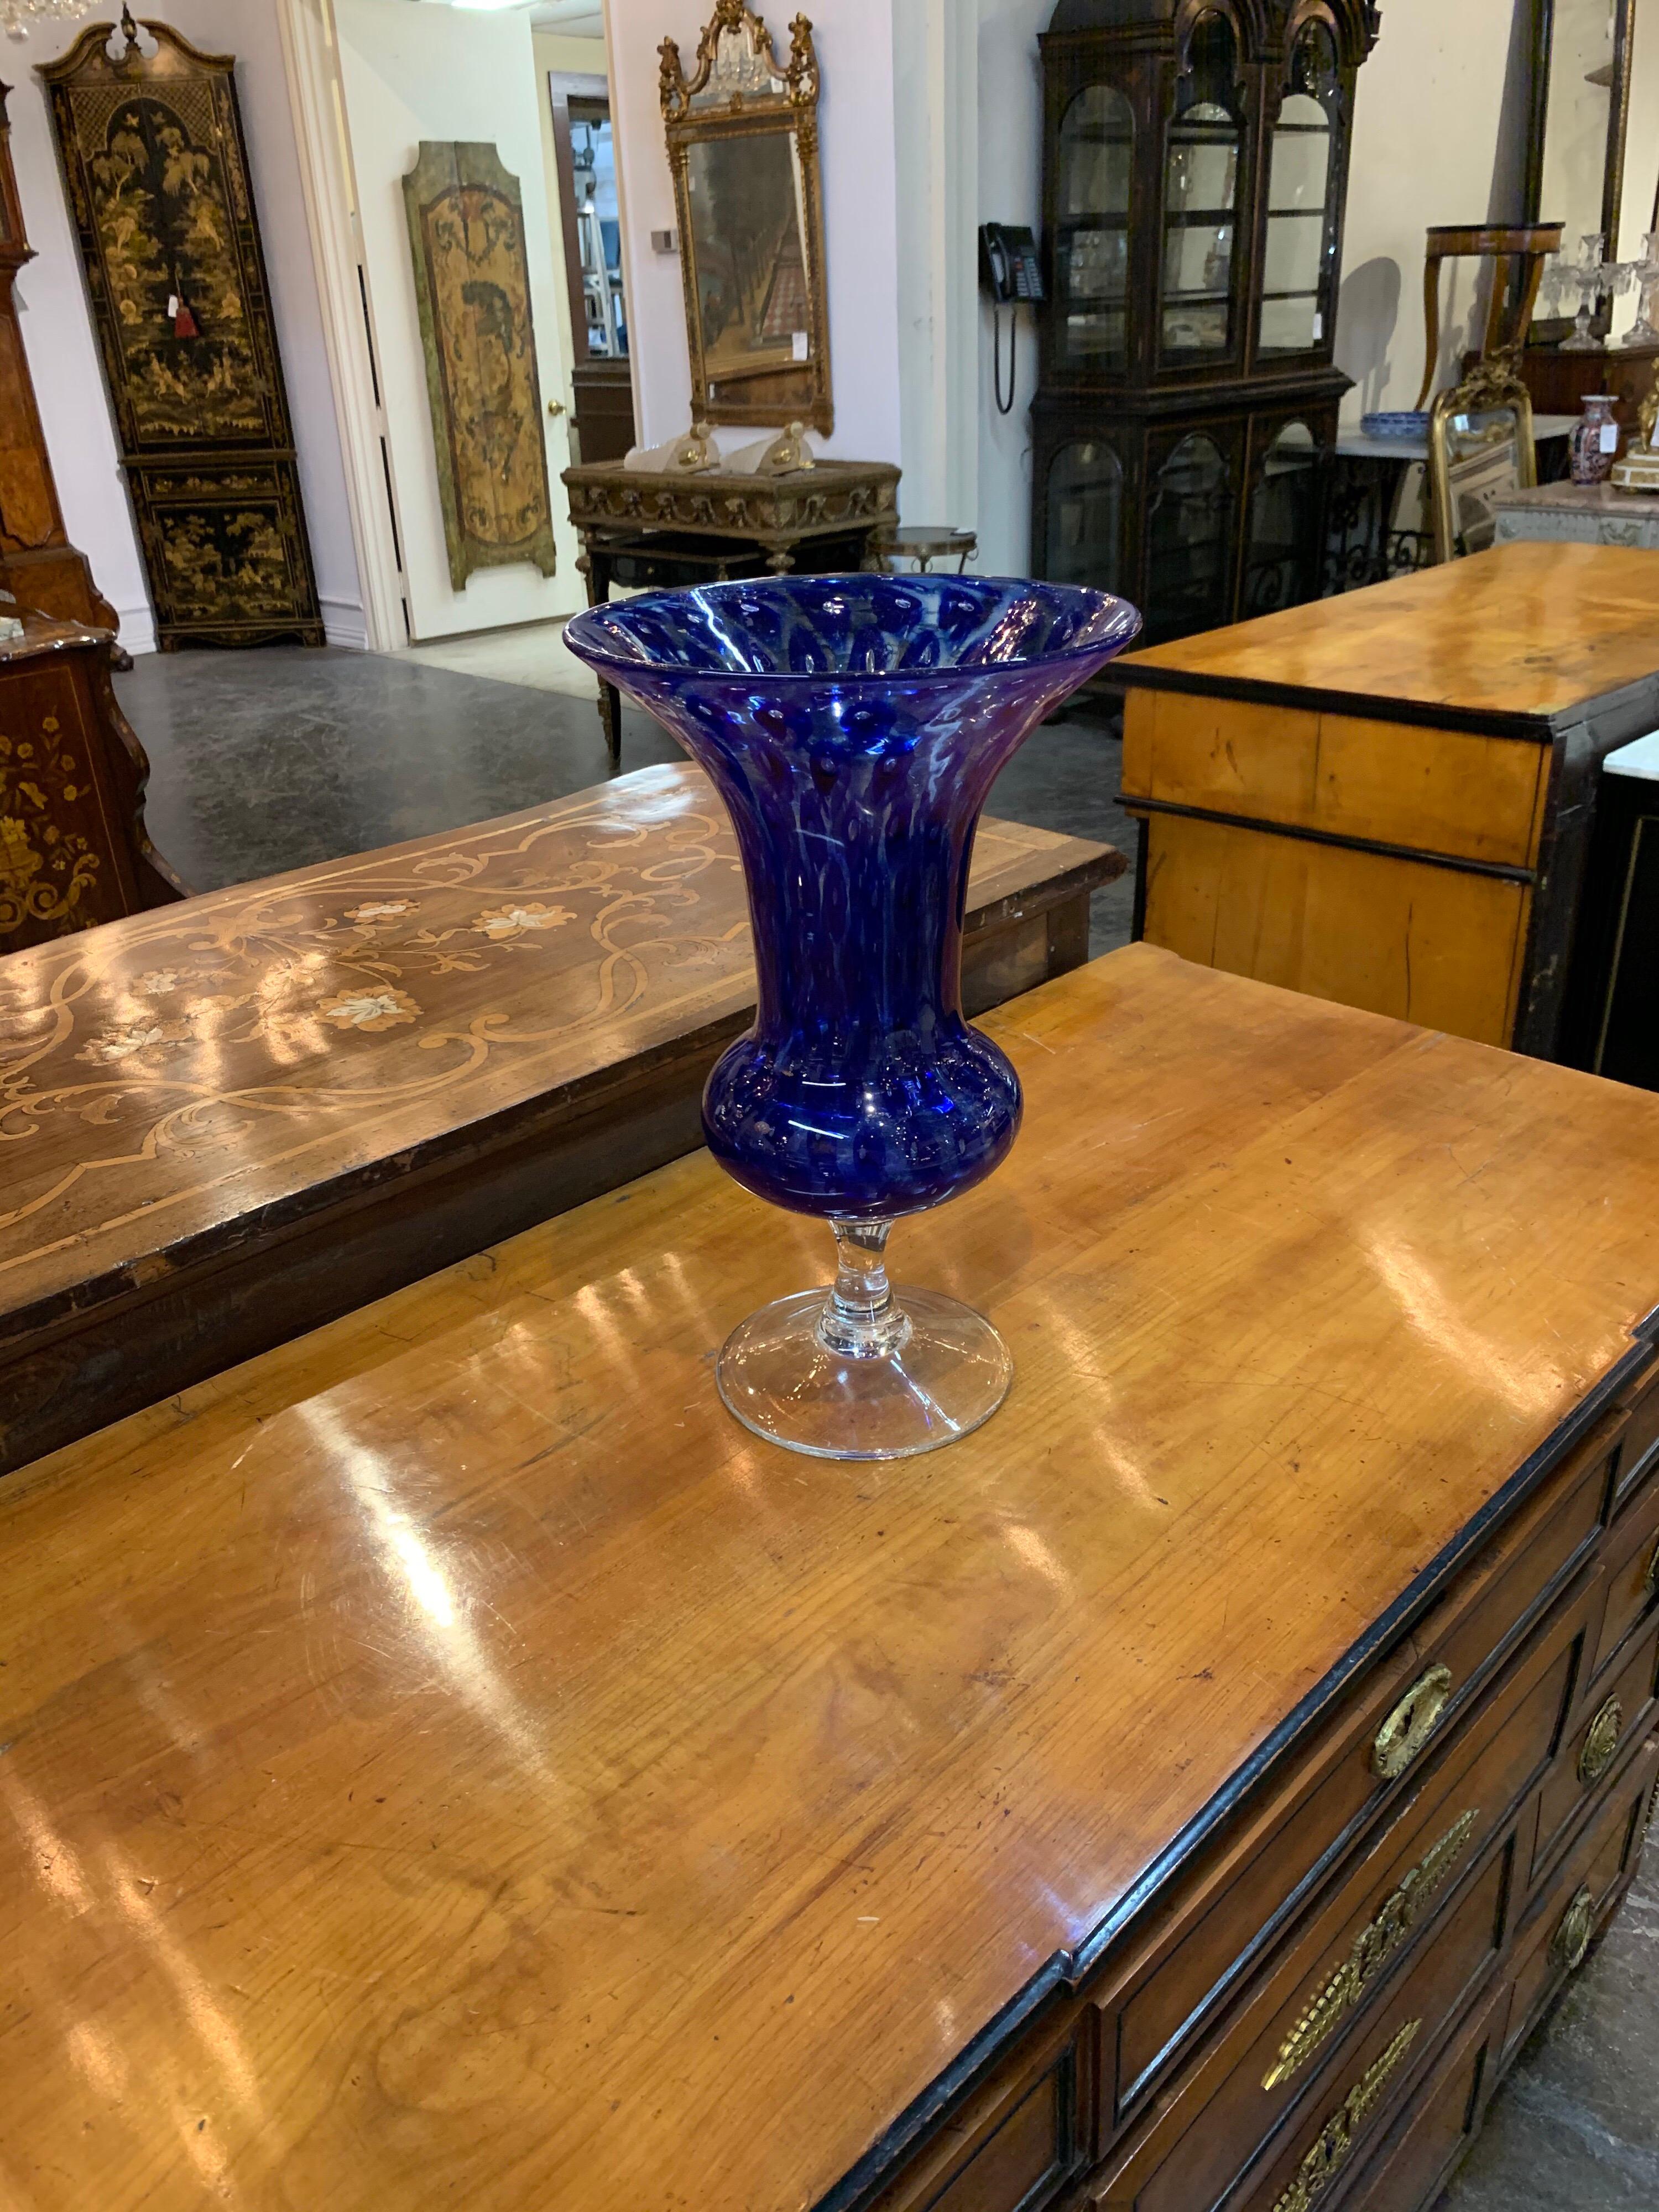 Gorgeous vintage Murano glass cobalt blue vase with a lovely swirling pattern. A beautiful accessory!